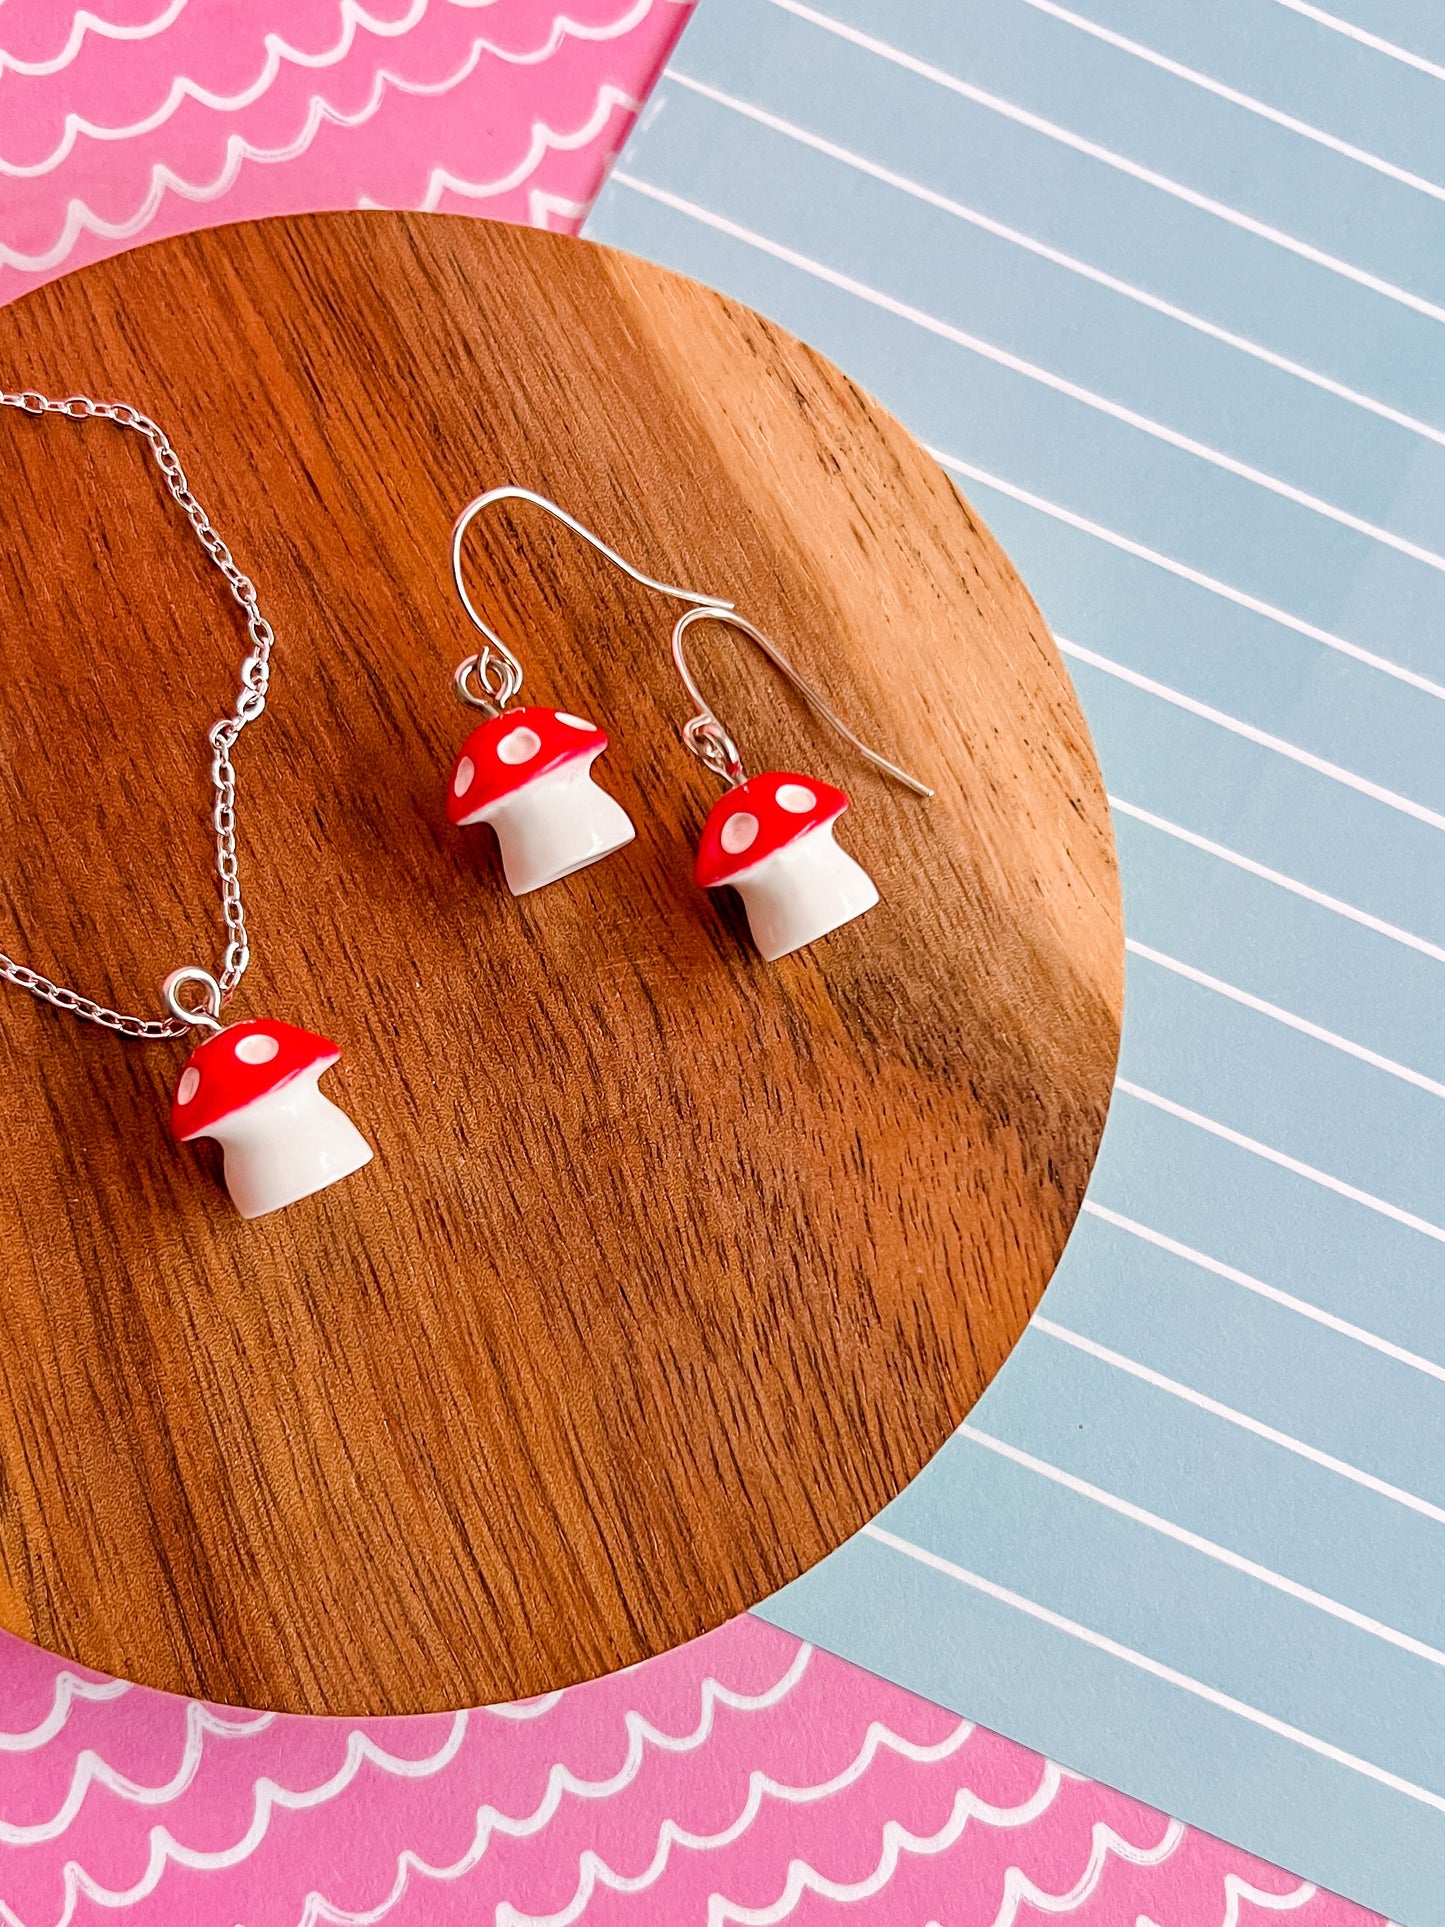 Melvin the Mushroom Necklace and Earrings